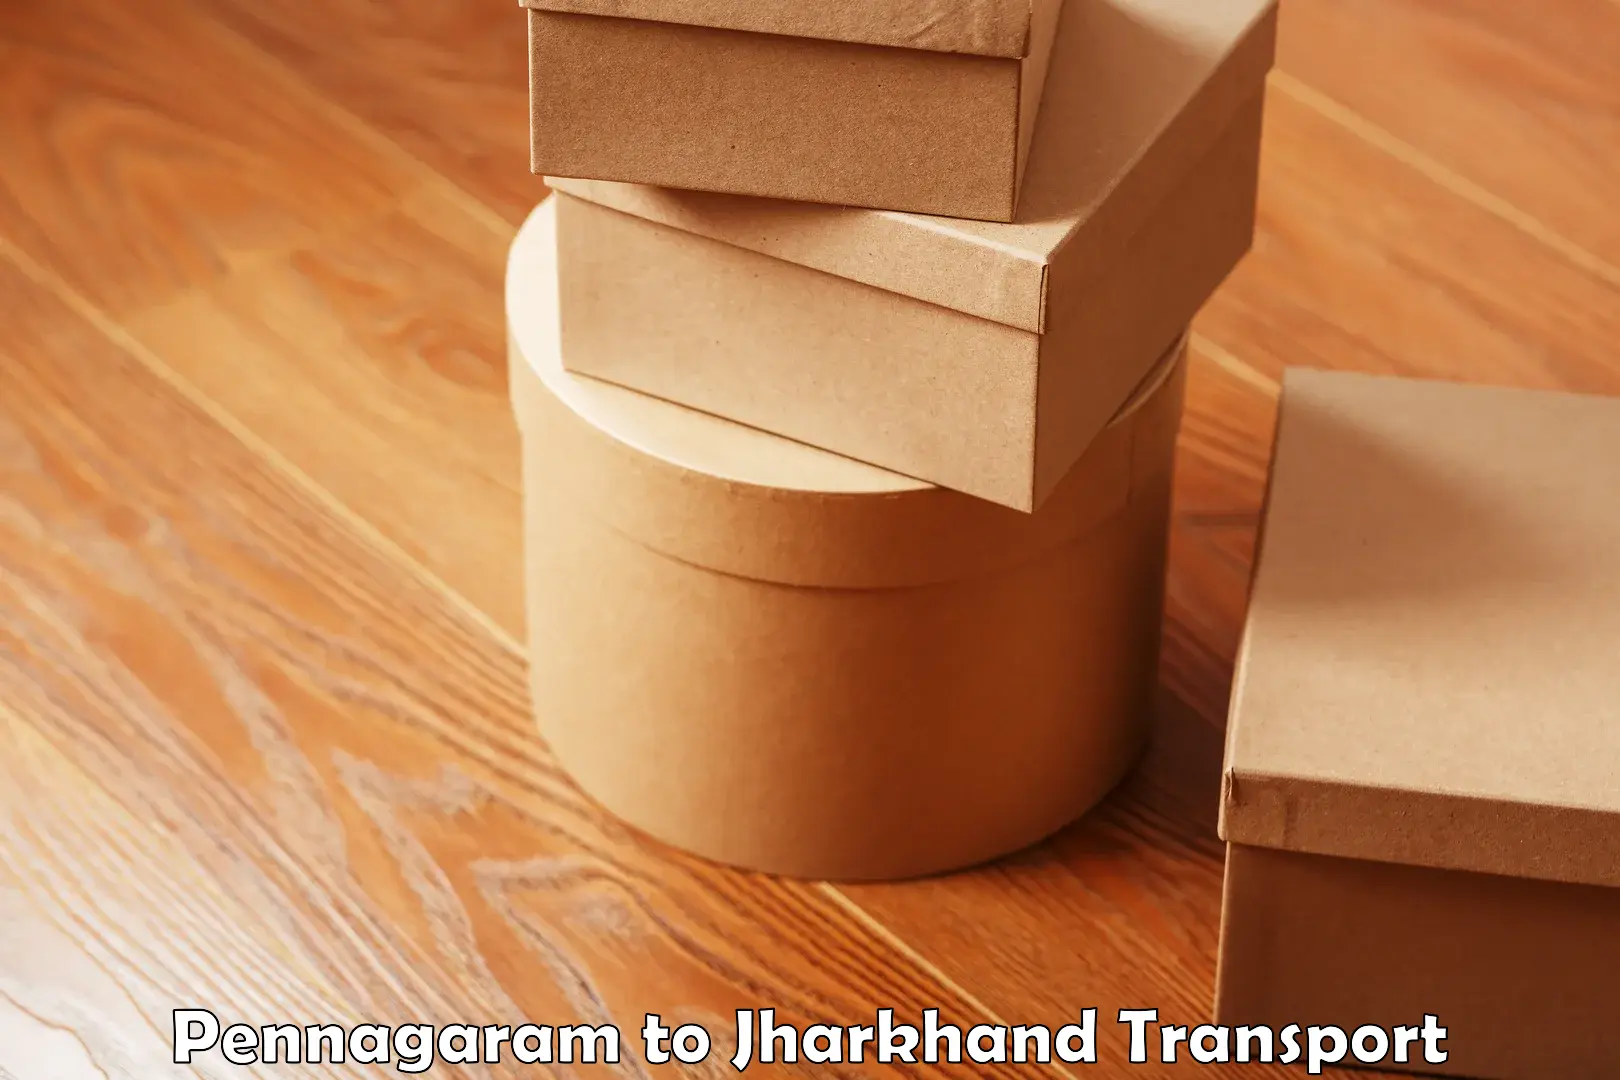 Container transport service in Pennagaram to Jharia